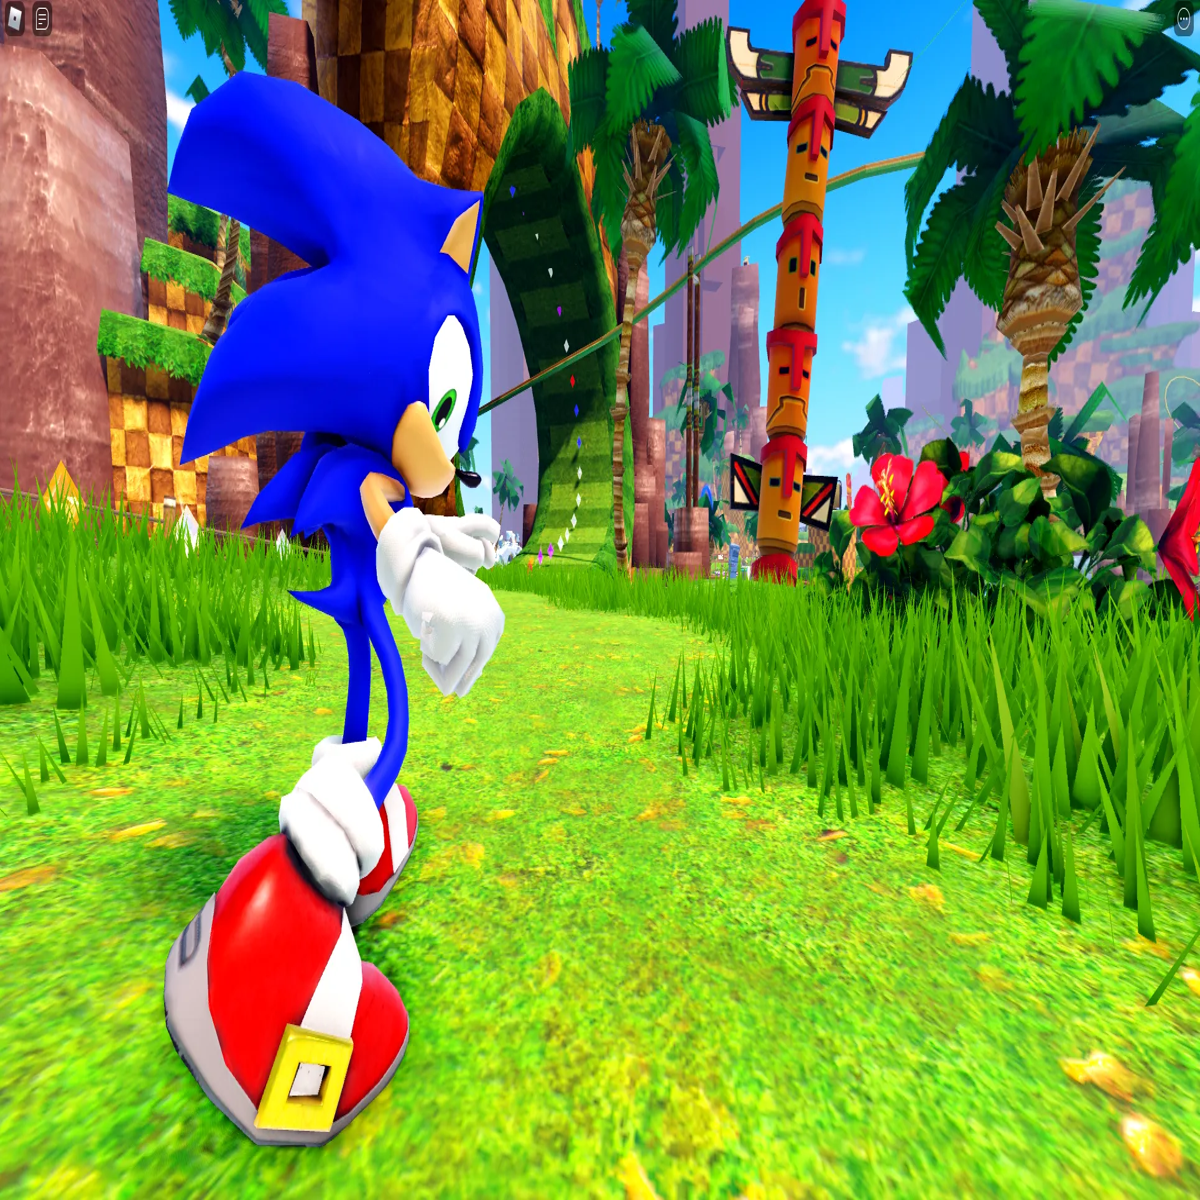 What's New on Sonic Speed Simulator leaks of 2023 in 2023